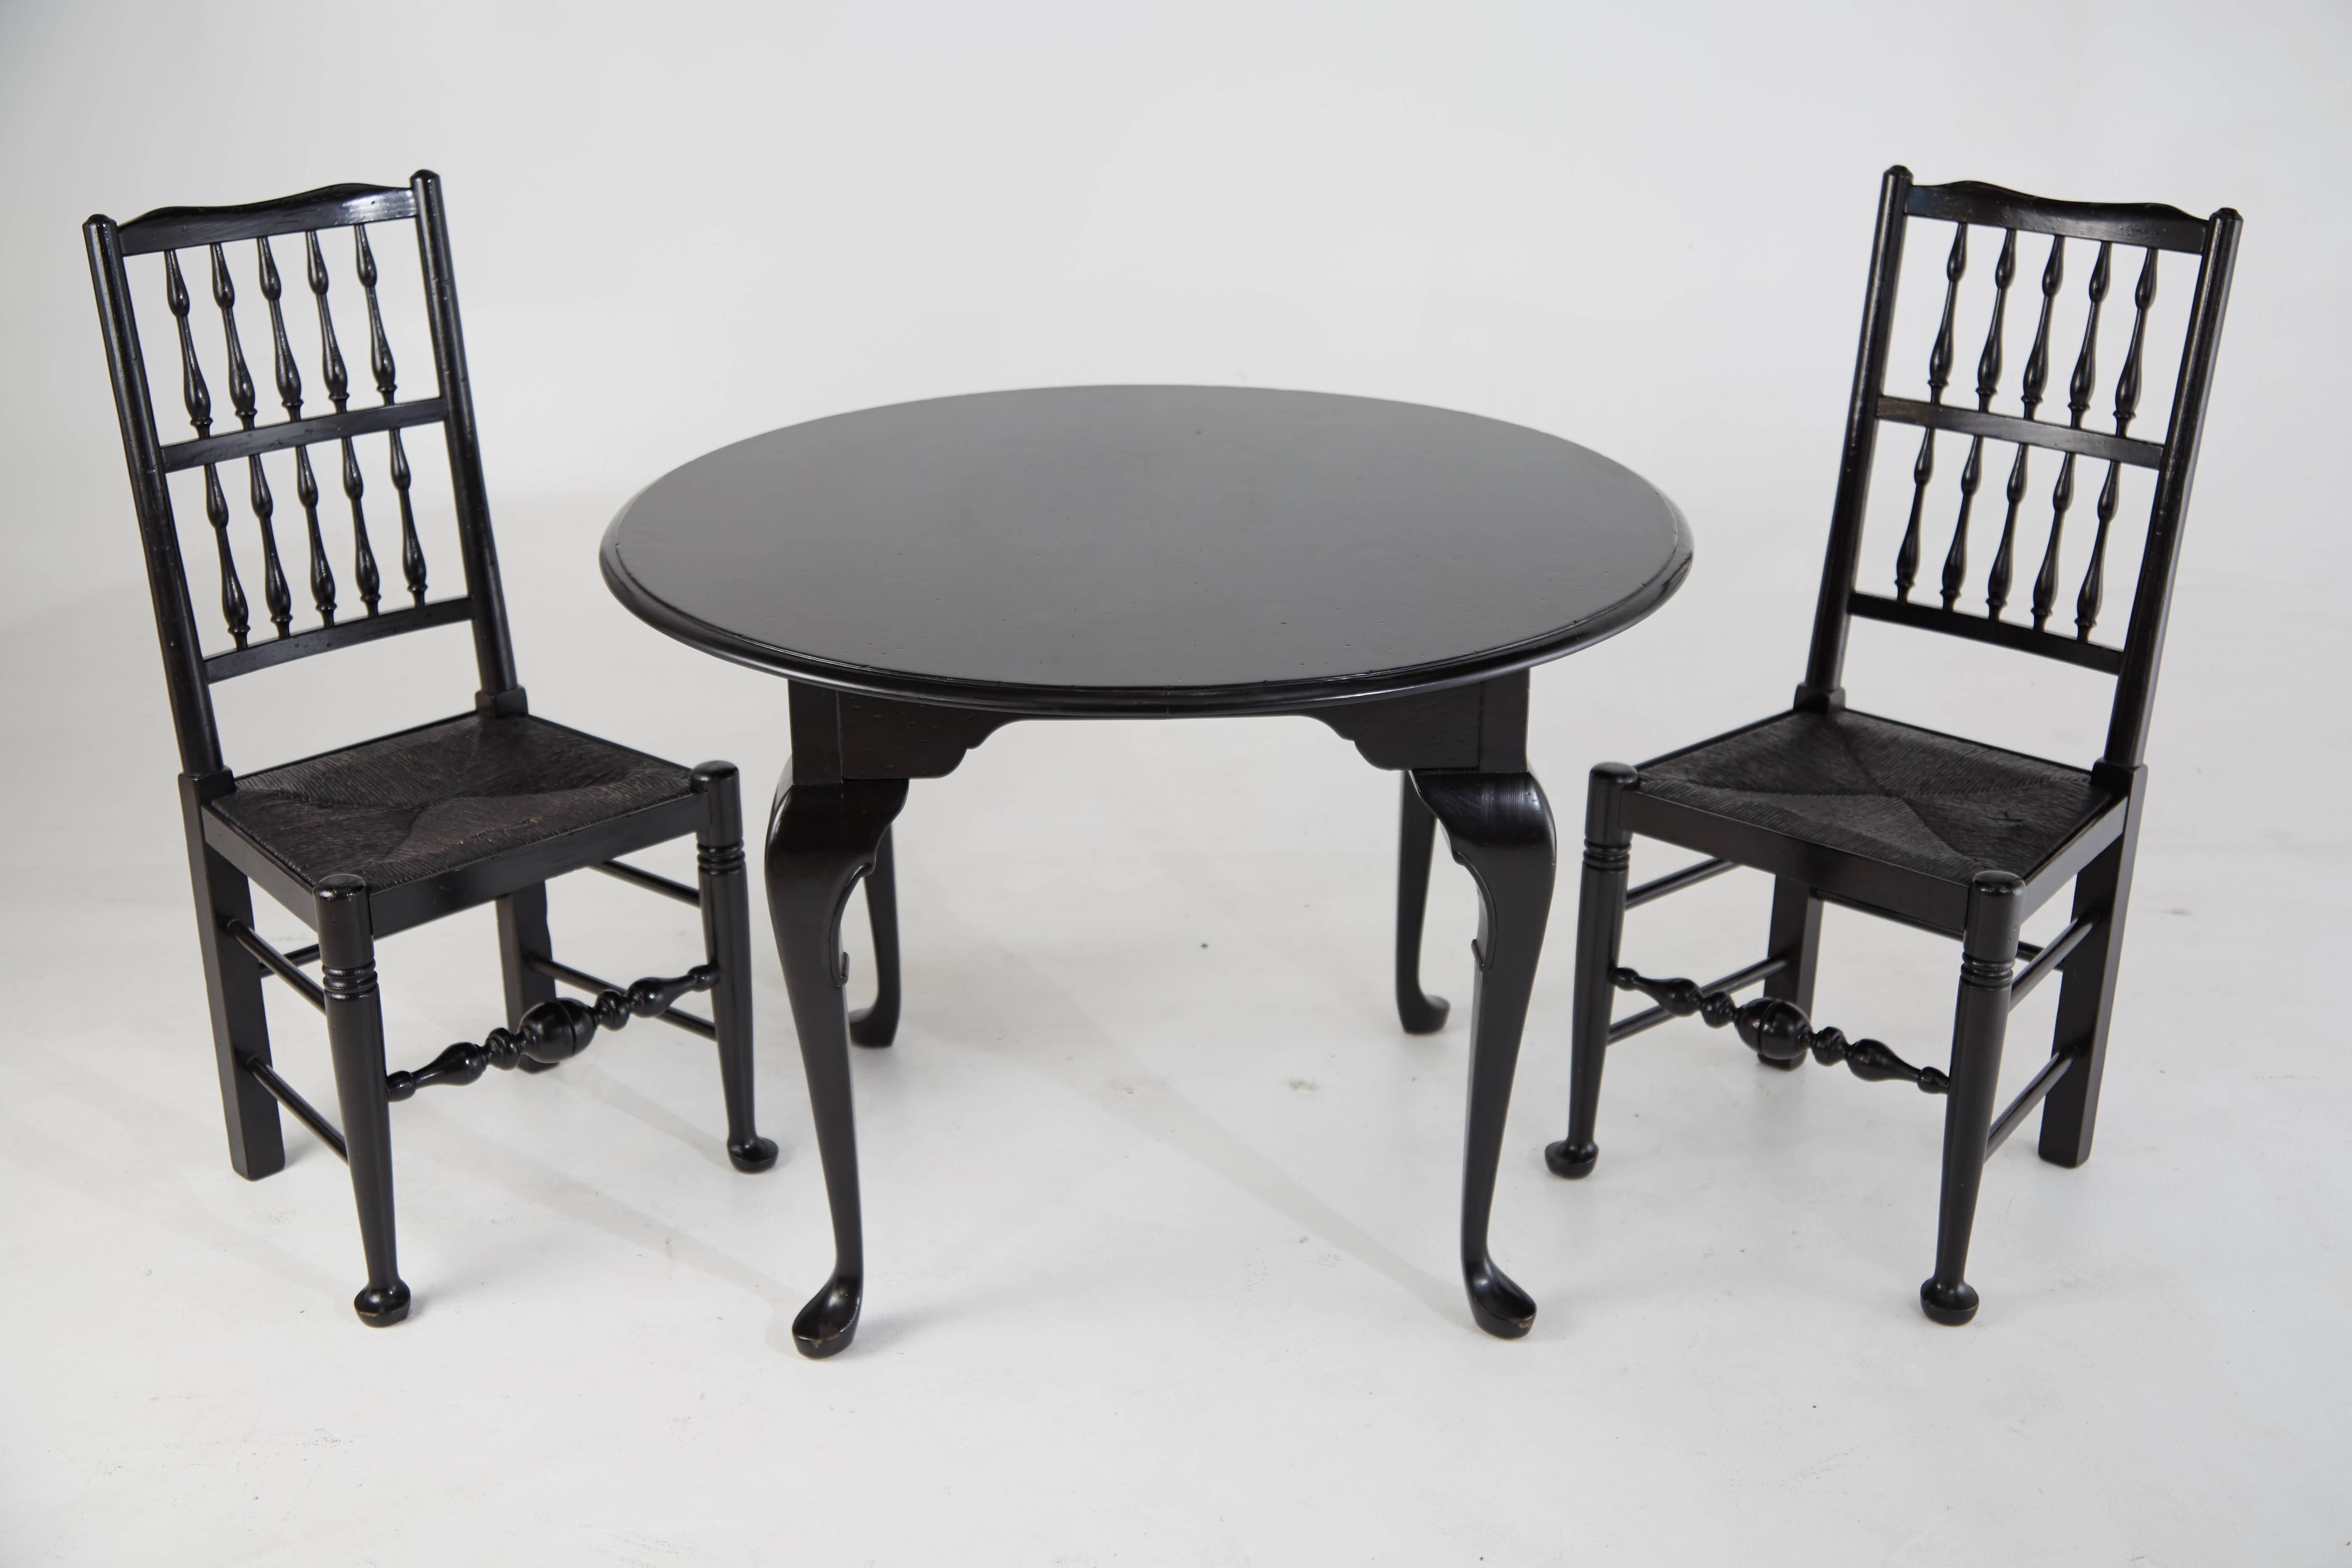 Black Lacquer Colonial Revival & Queen Anne Style Chairs and Table 1